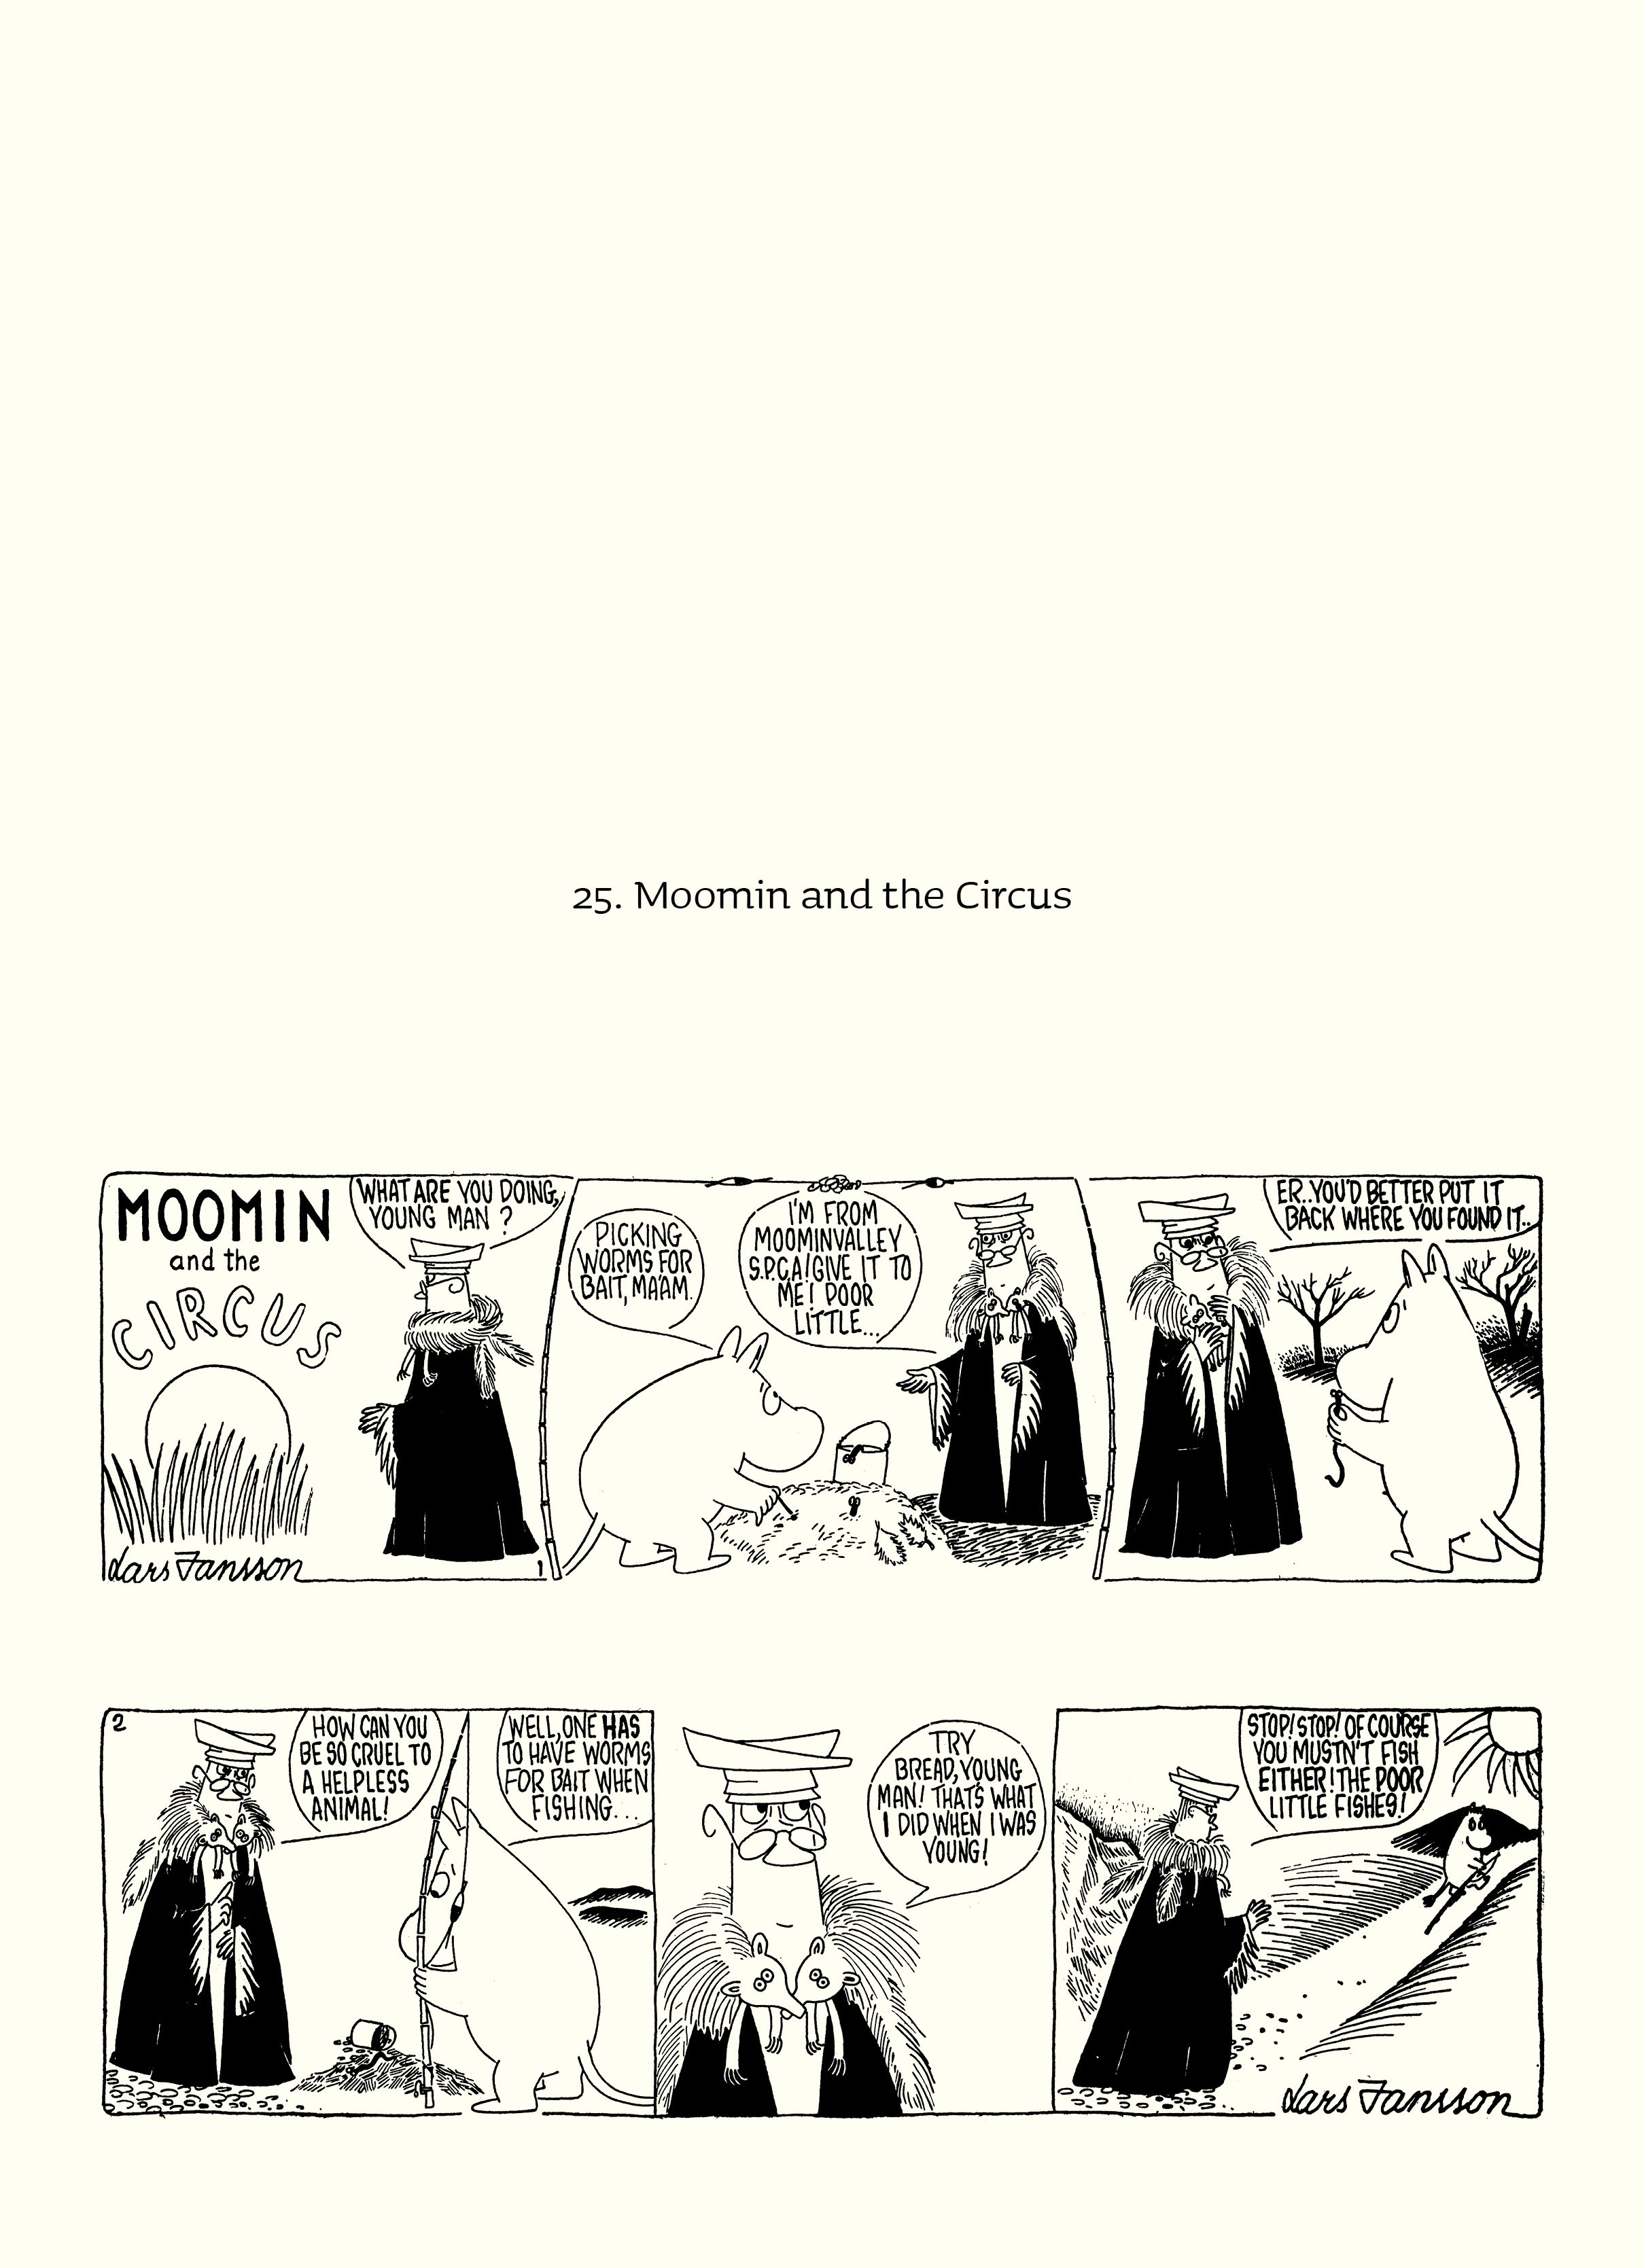 Read online Moomin: The Complete Lars Jansson Comic Strip comic -  Issue # TPB 6 - 68